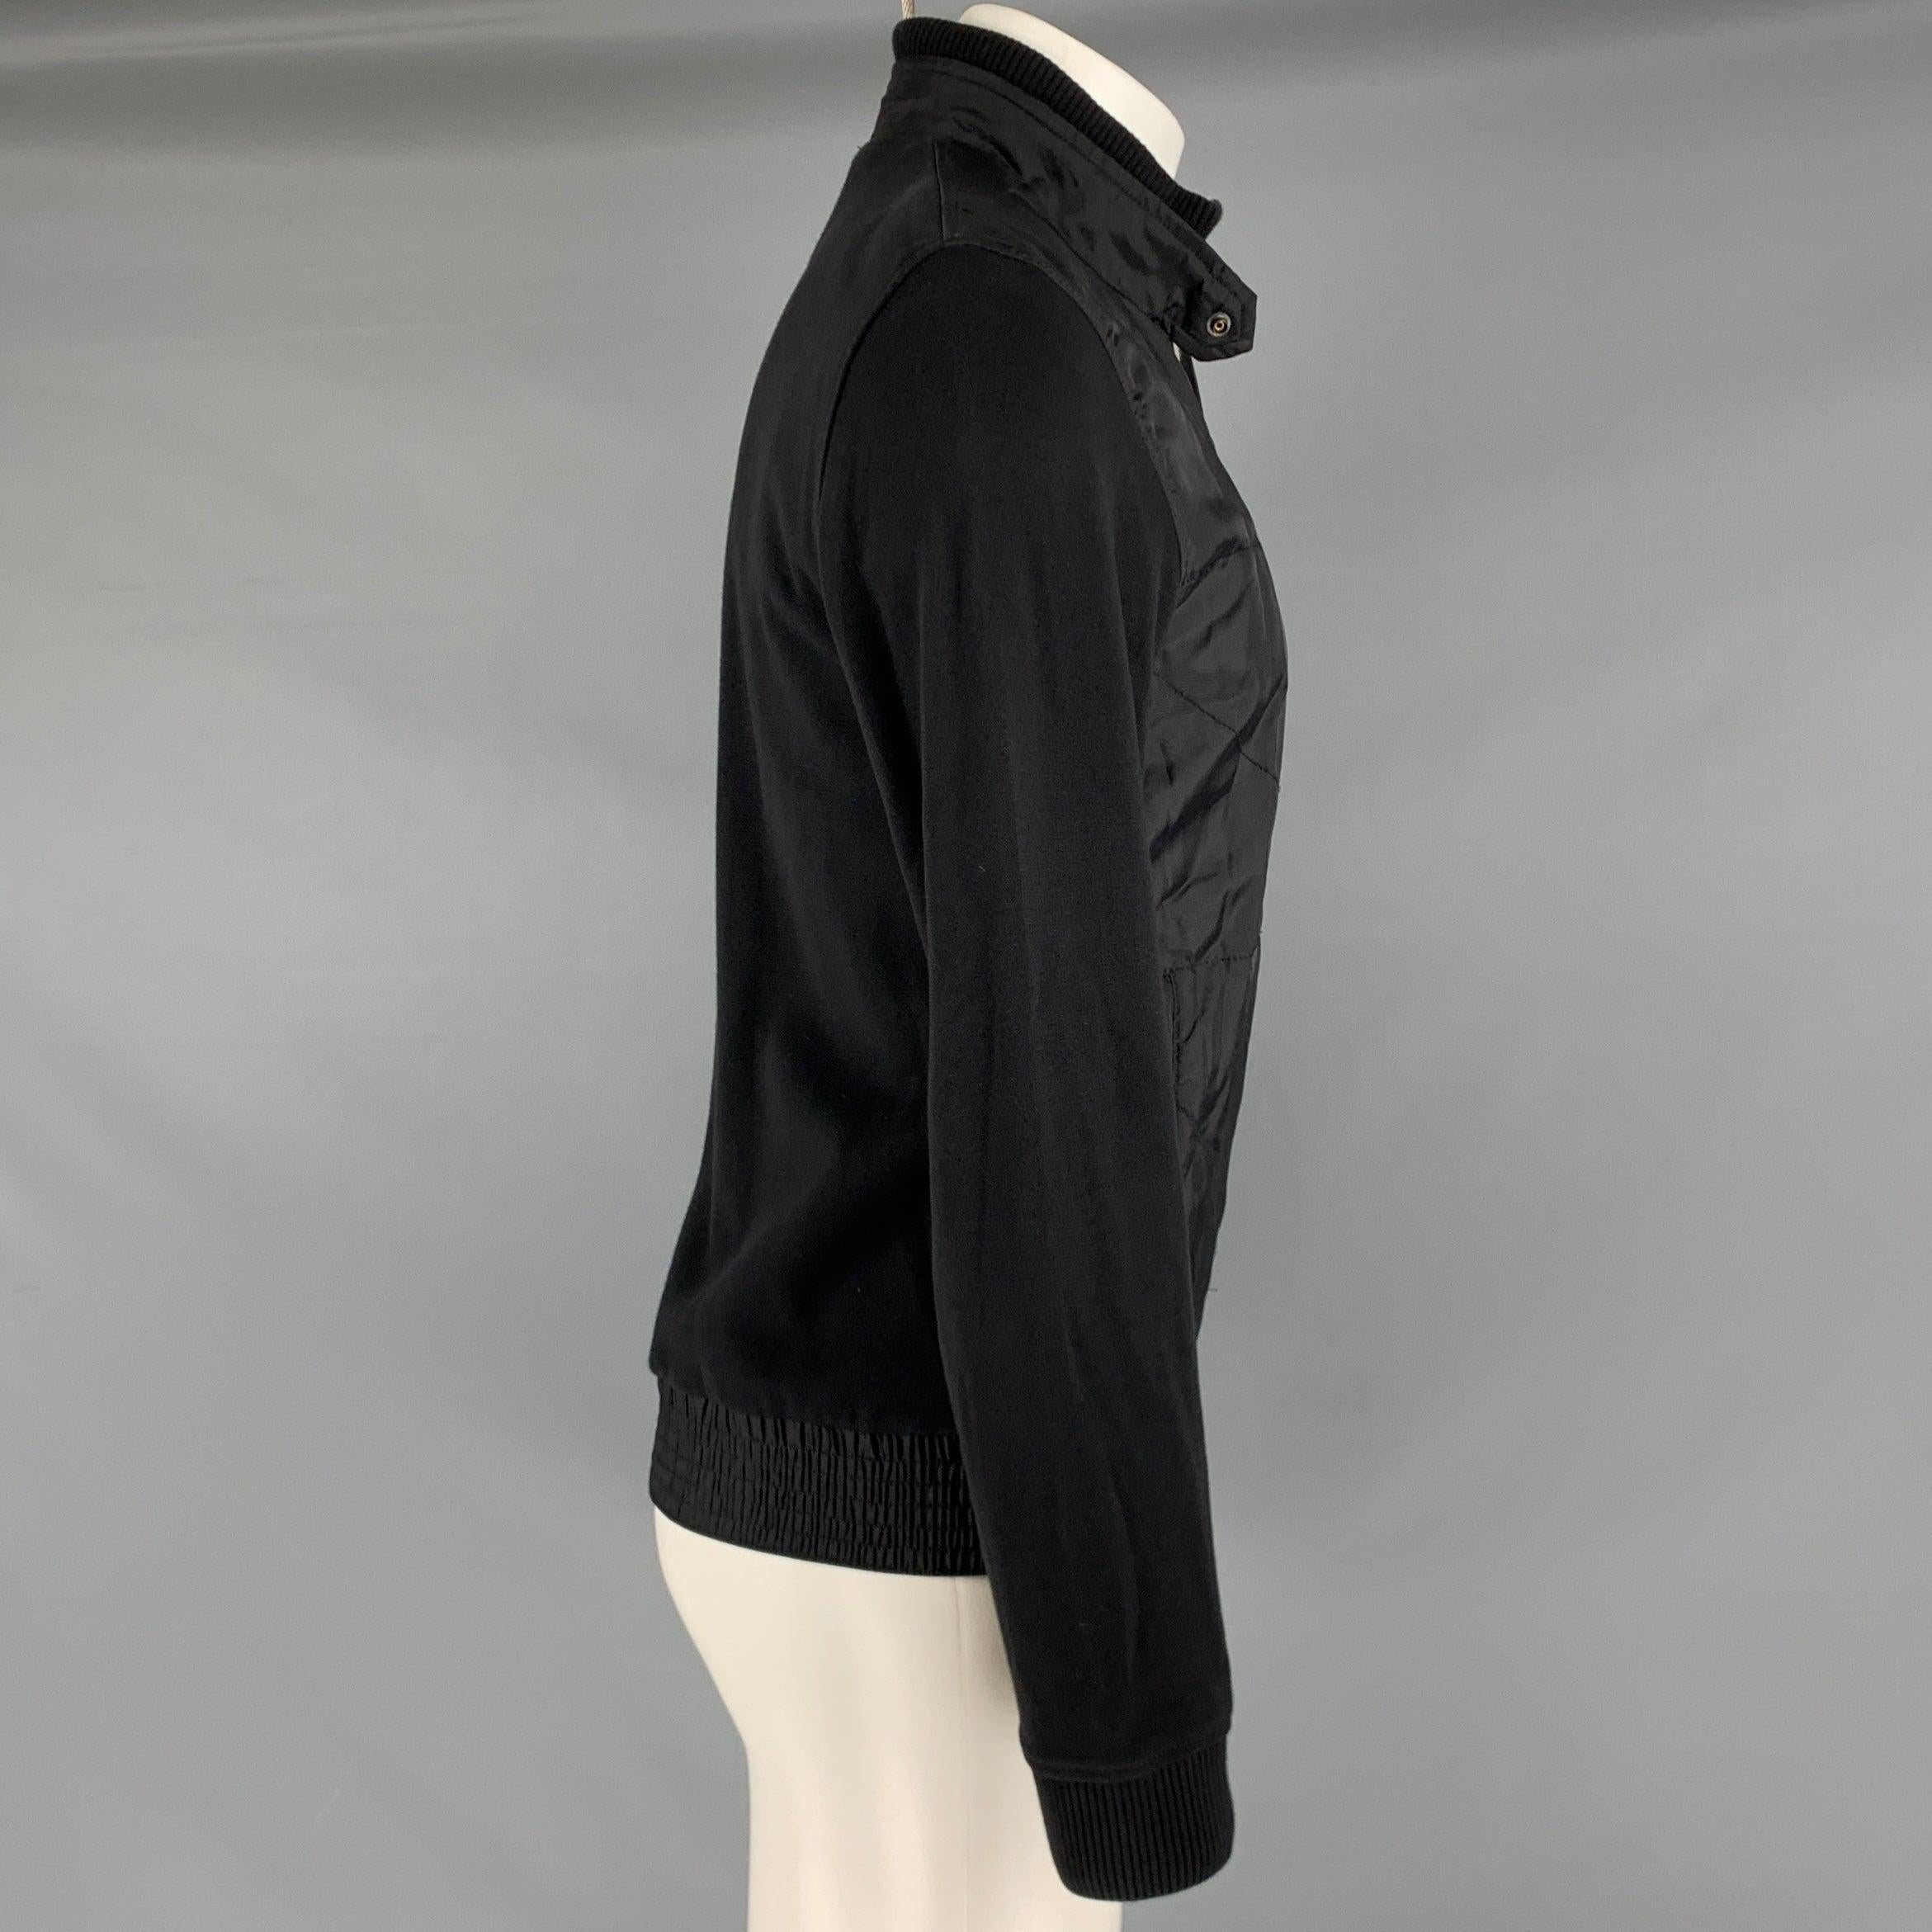 HUGO BOSS jacket
in a black cotton nylon fabric featuring a mixed fabrics style, regular fit, and zip up closure.Good Pre-Owned Condition. Moderate signs of wear, please check photos. 

Marked:   S 

Measurements: 
 
Shoulder: 17 inches Chest: 39